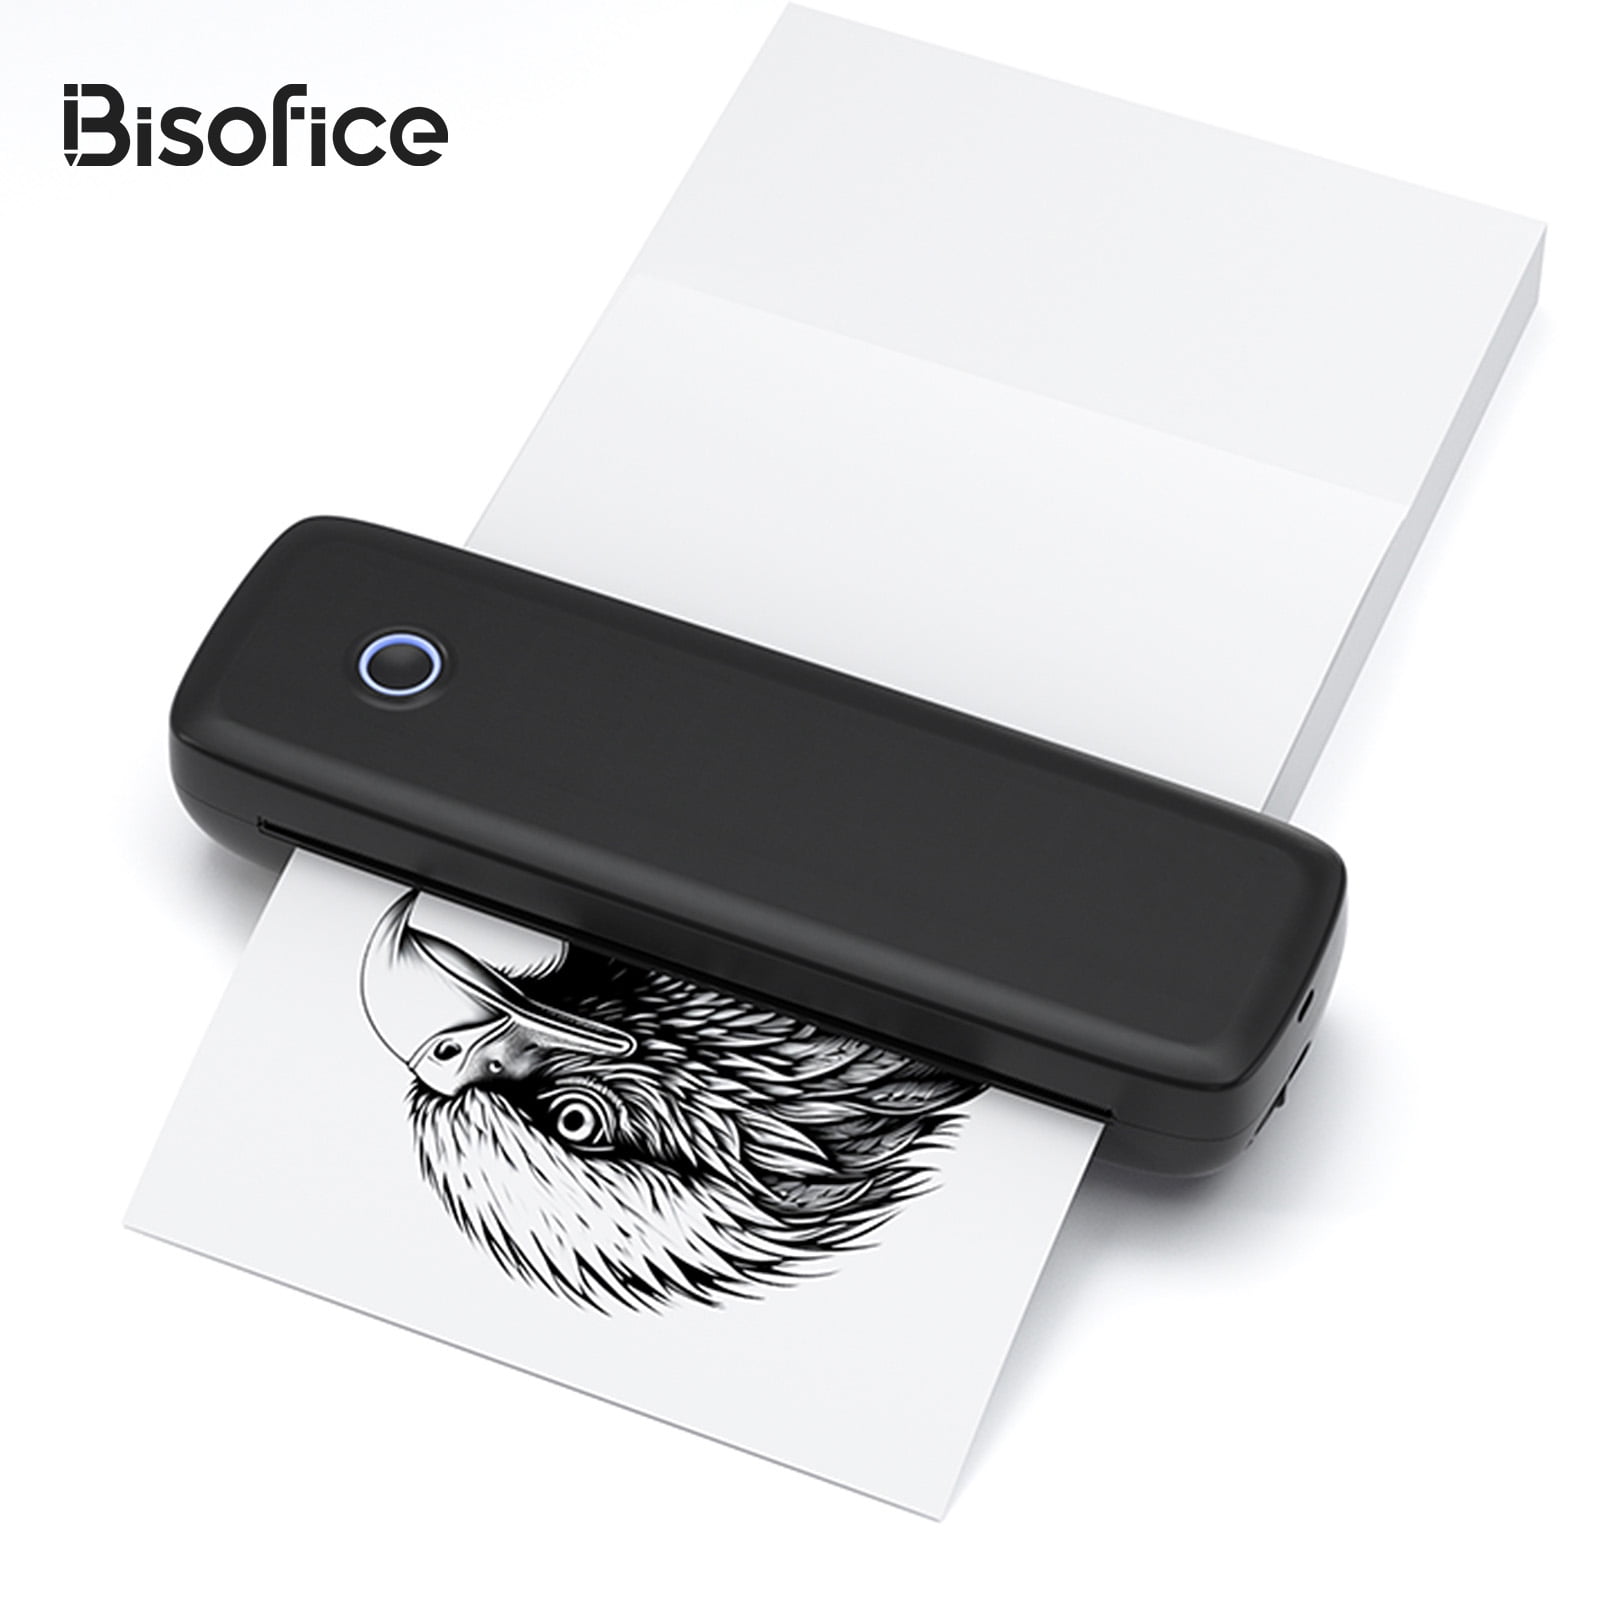 Bisofice Portable Printers Wireless for Travel, Bluetooth Thermal Printer  Compatible with iOS, Android, Laptop, Inkless Mobile Printer for Office,  Home, School 